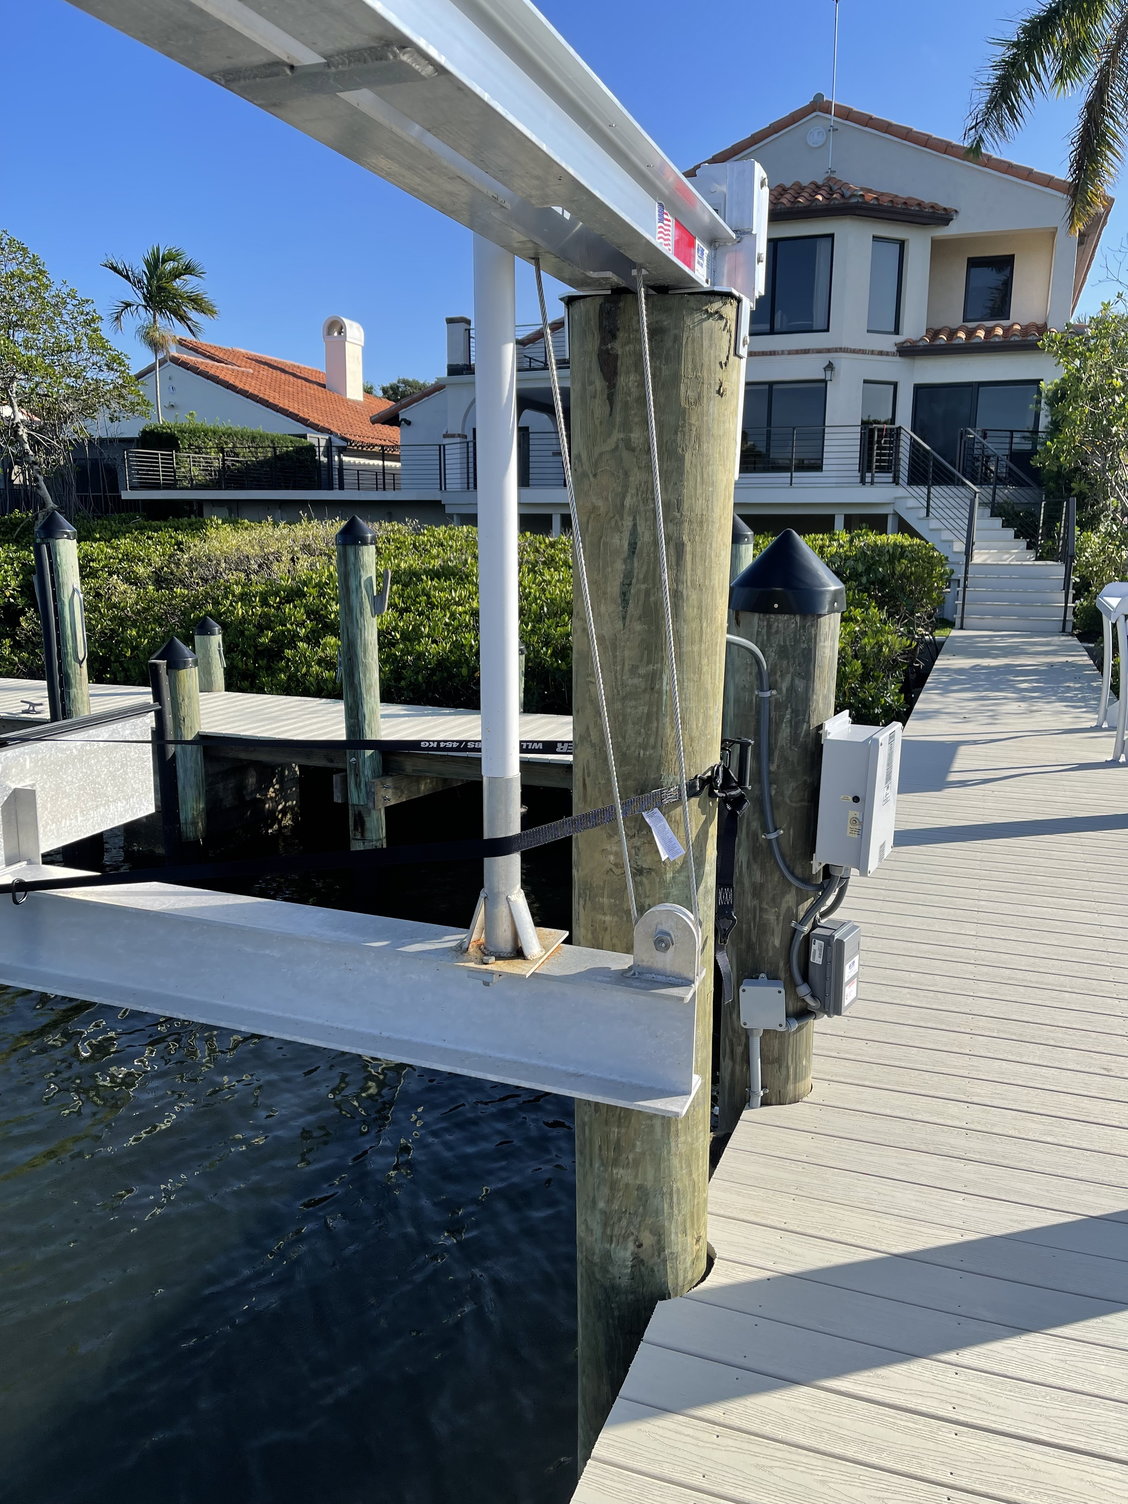 Tips To Prepare Your Boat For Hurricane Season - The Boat Lift Pro's